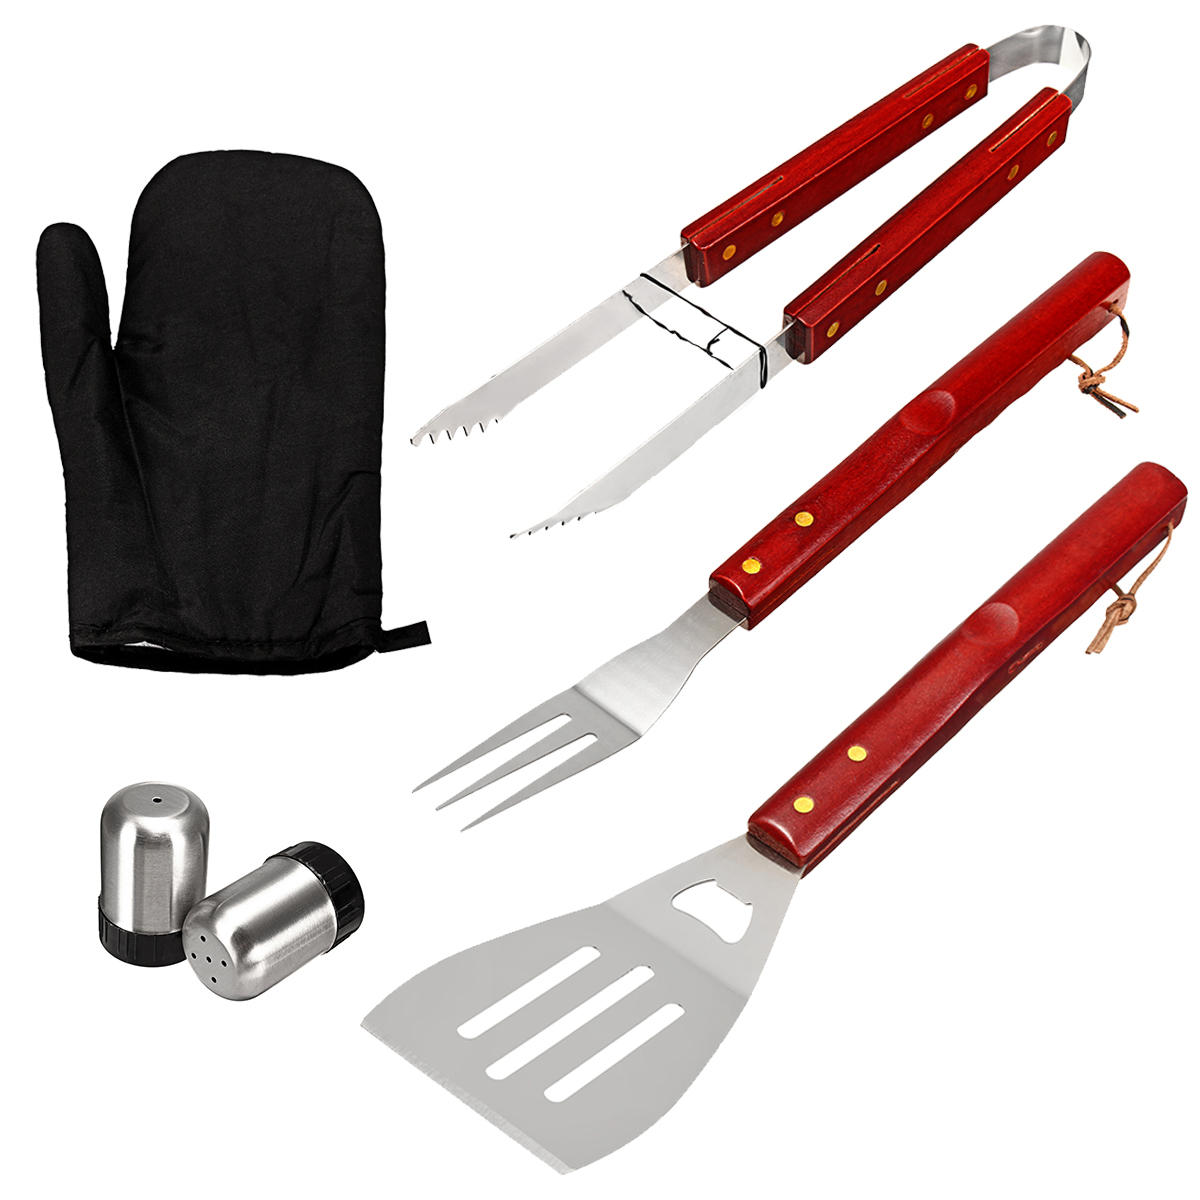 7Pcs BBQ Cooking Grill Set Stainless Steel Cooking Kits Utensil Apron Storage Bag Camping Picnic